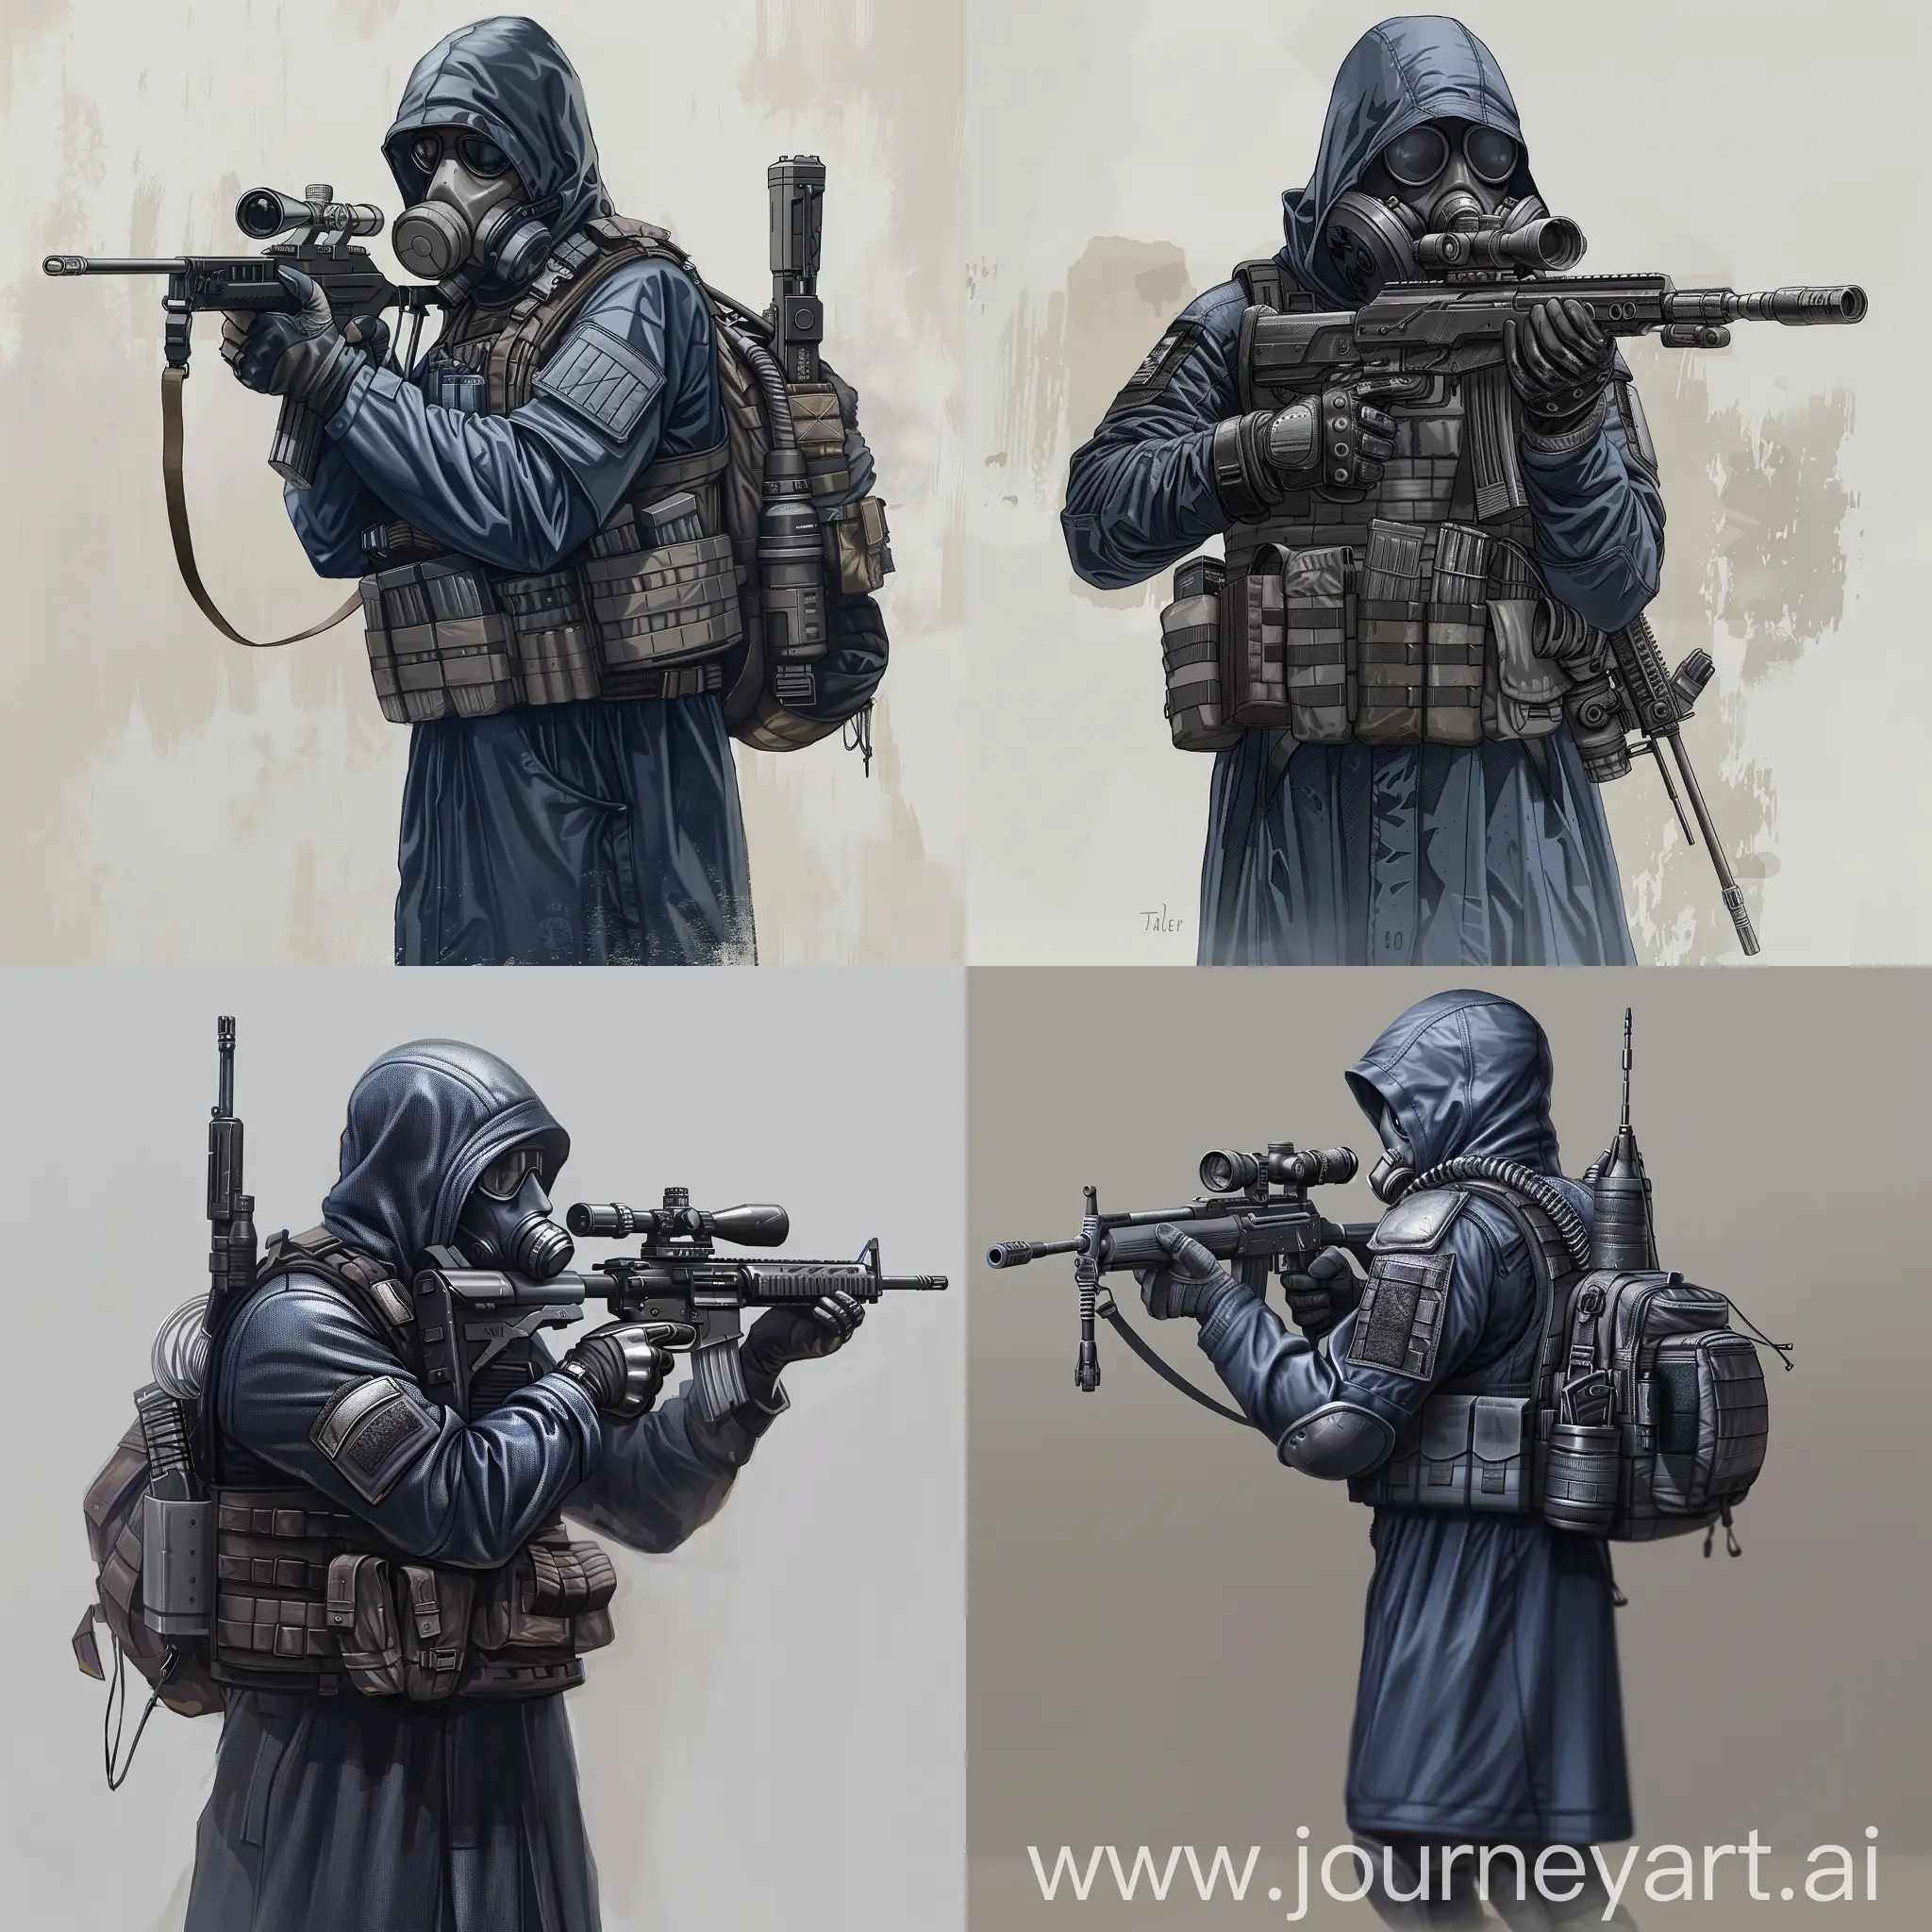 Mercenary-from-STALKER-Universe-with-Sniper-Rifle